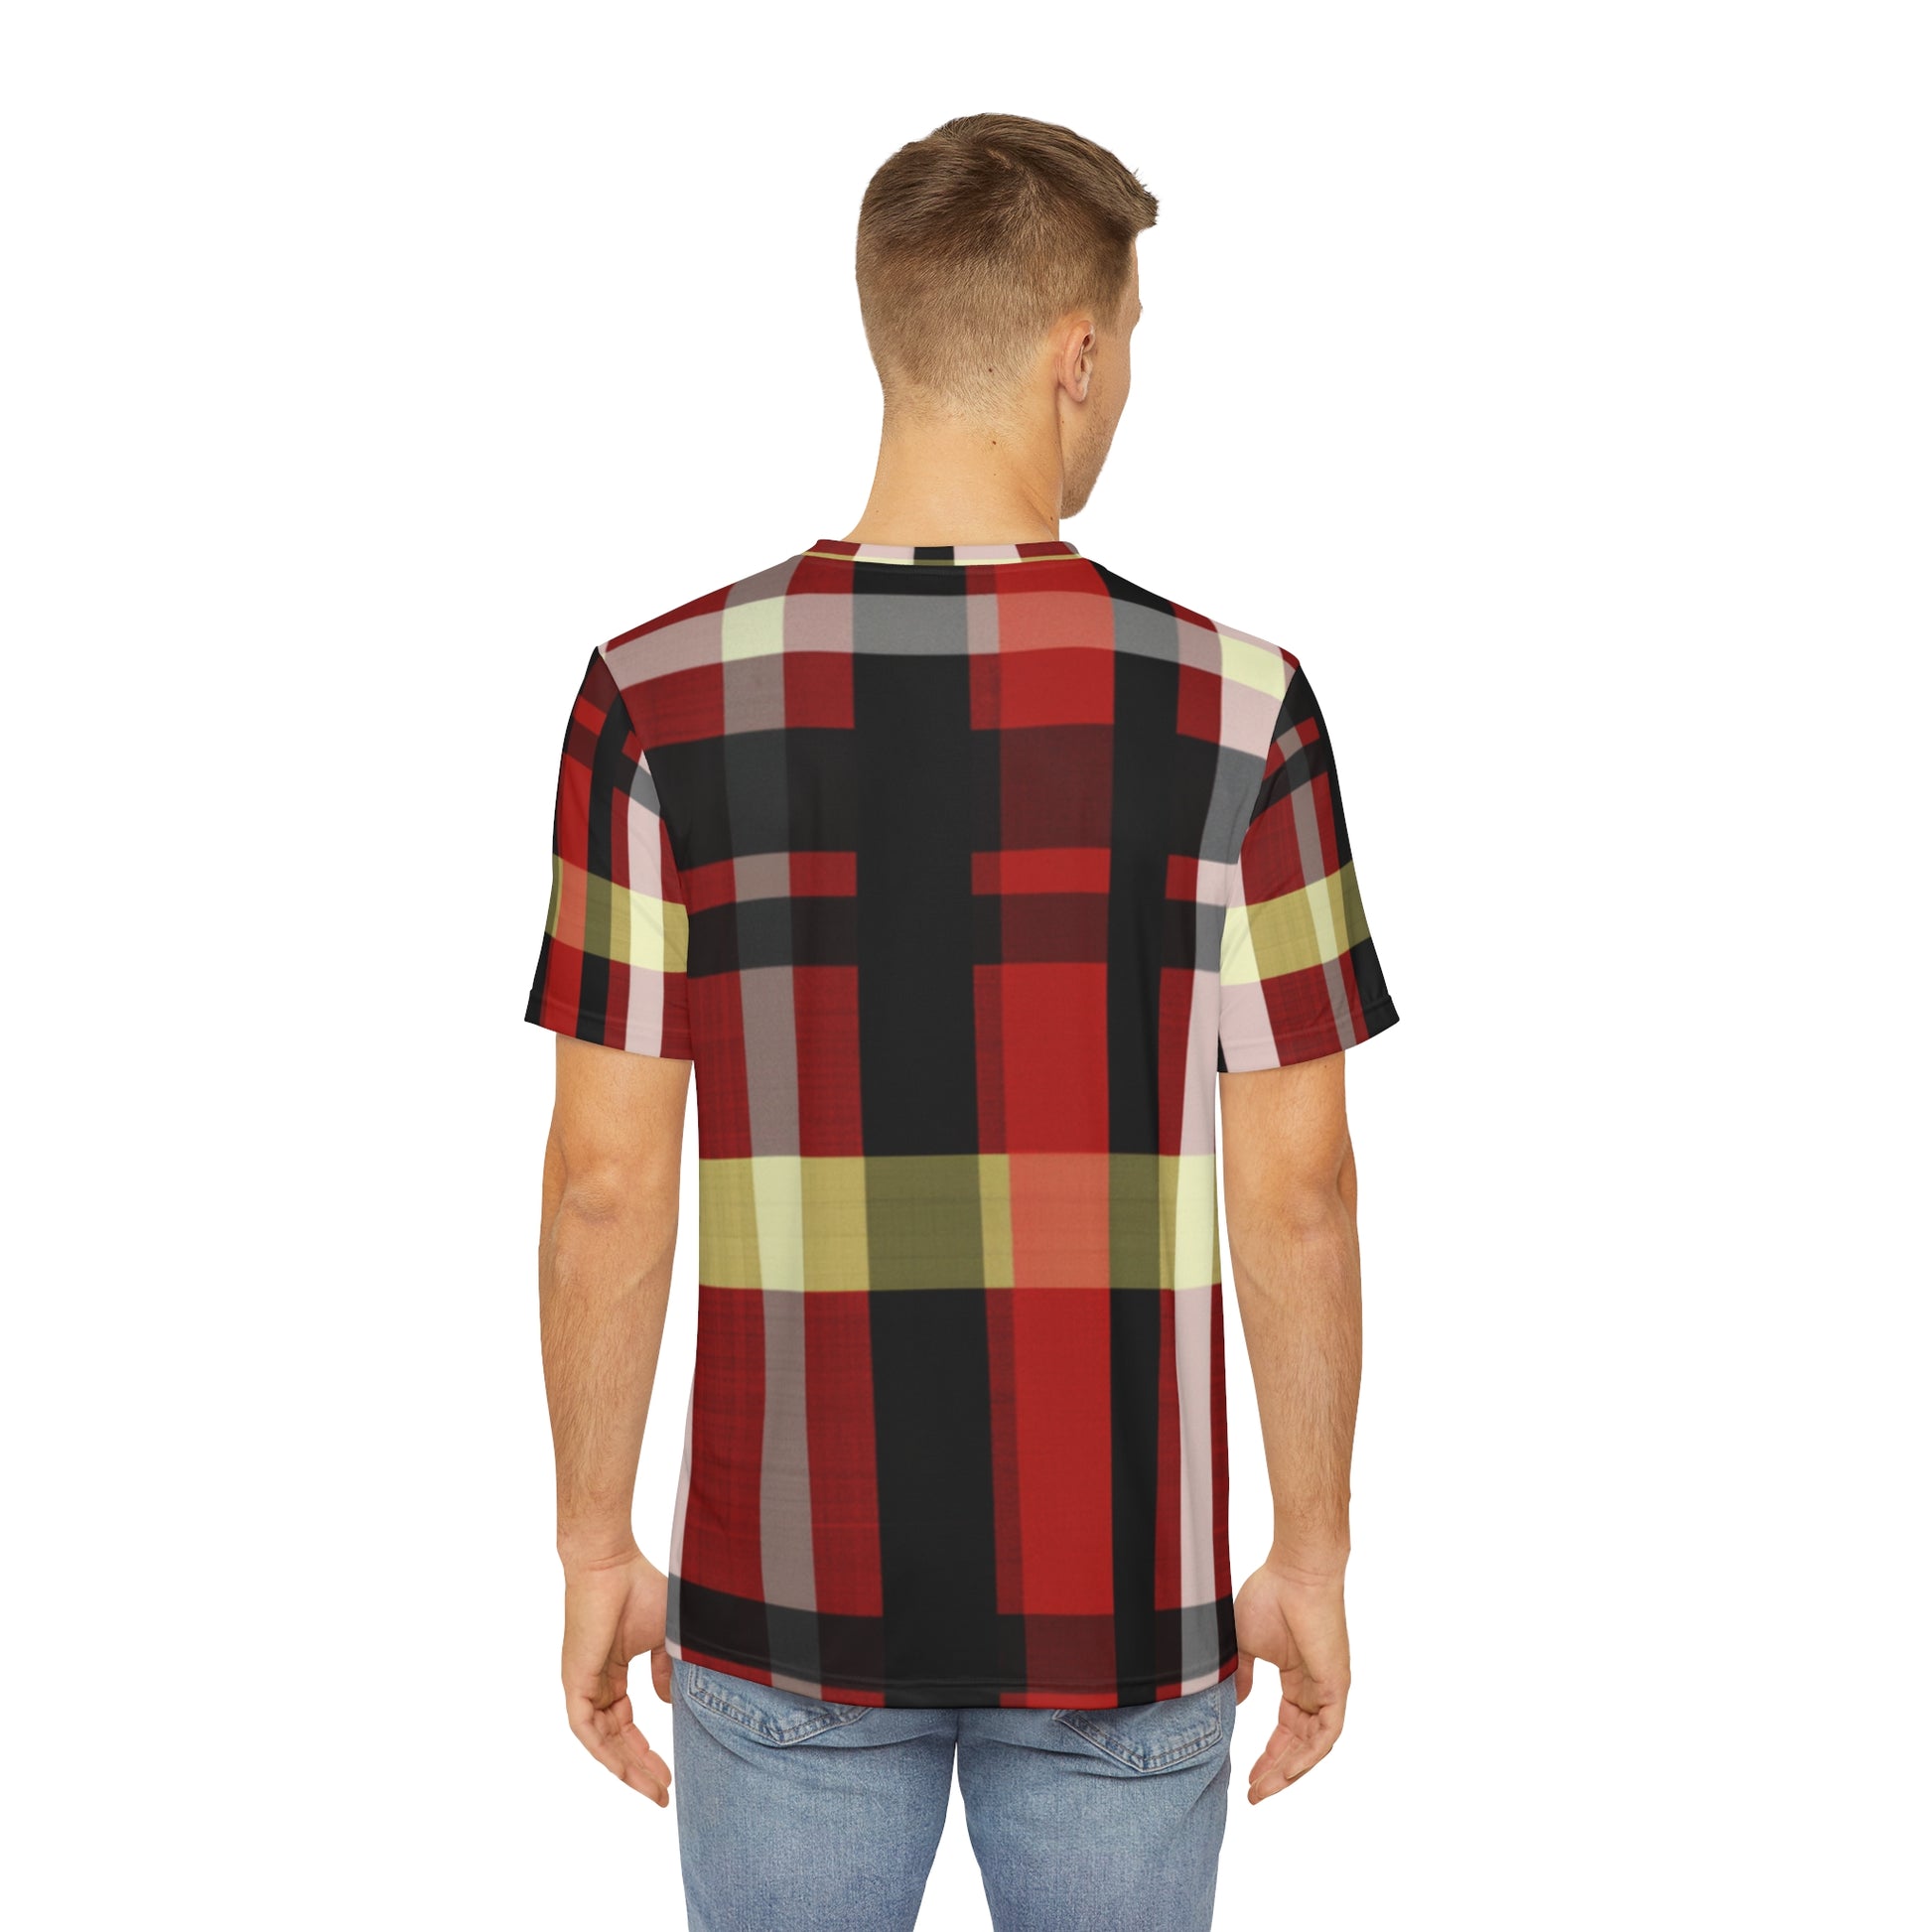 Back view of the Highlander's Dawn Tartan Crewneck Pullover Short-Sleeved Shirt red black white yellow plaid pattern paired  with casual denim pants worn by a white man